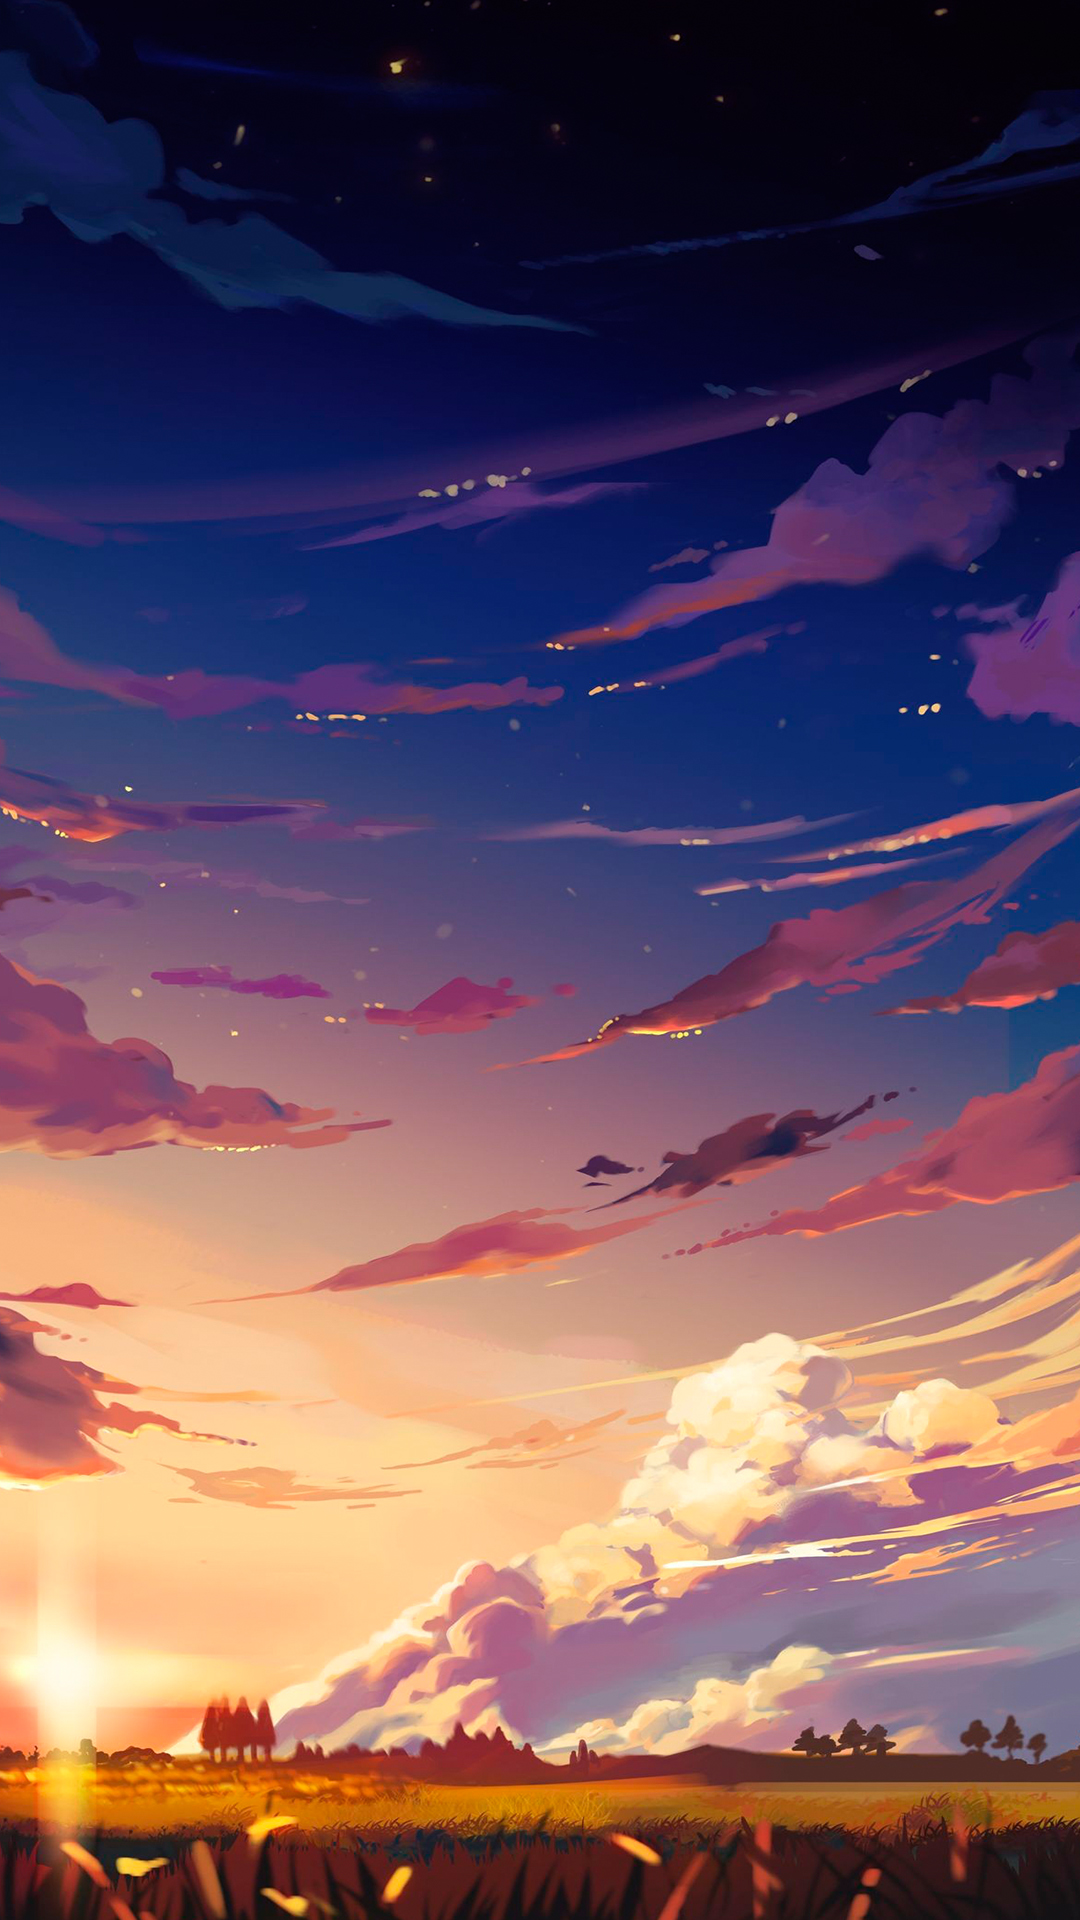 11,132 Anime Sky Background Images, Stock Photos & Vectors | Shutterstock